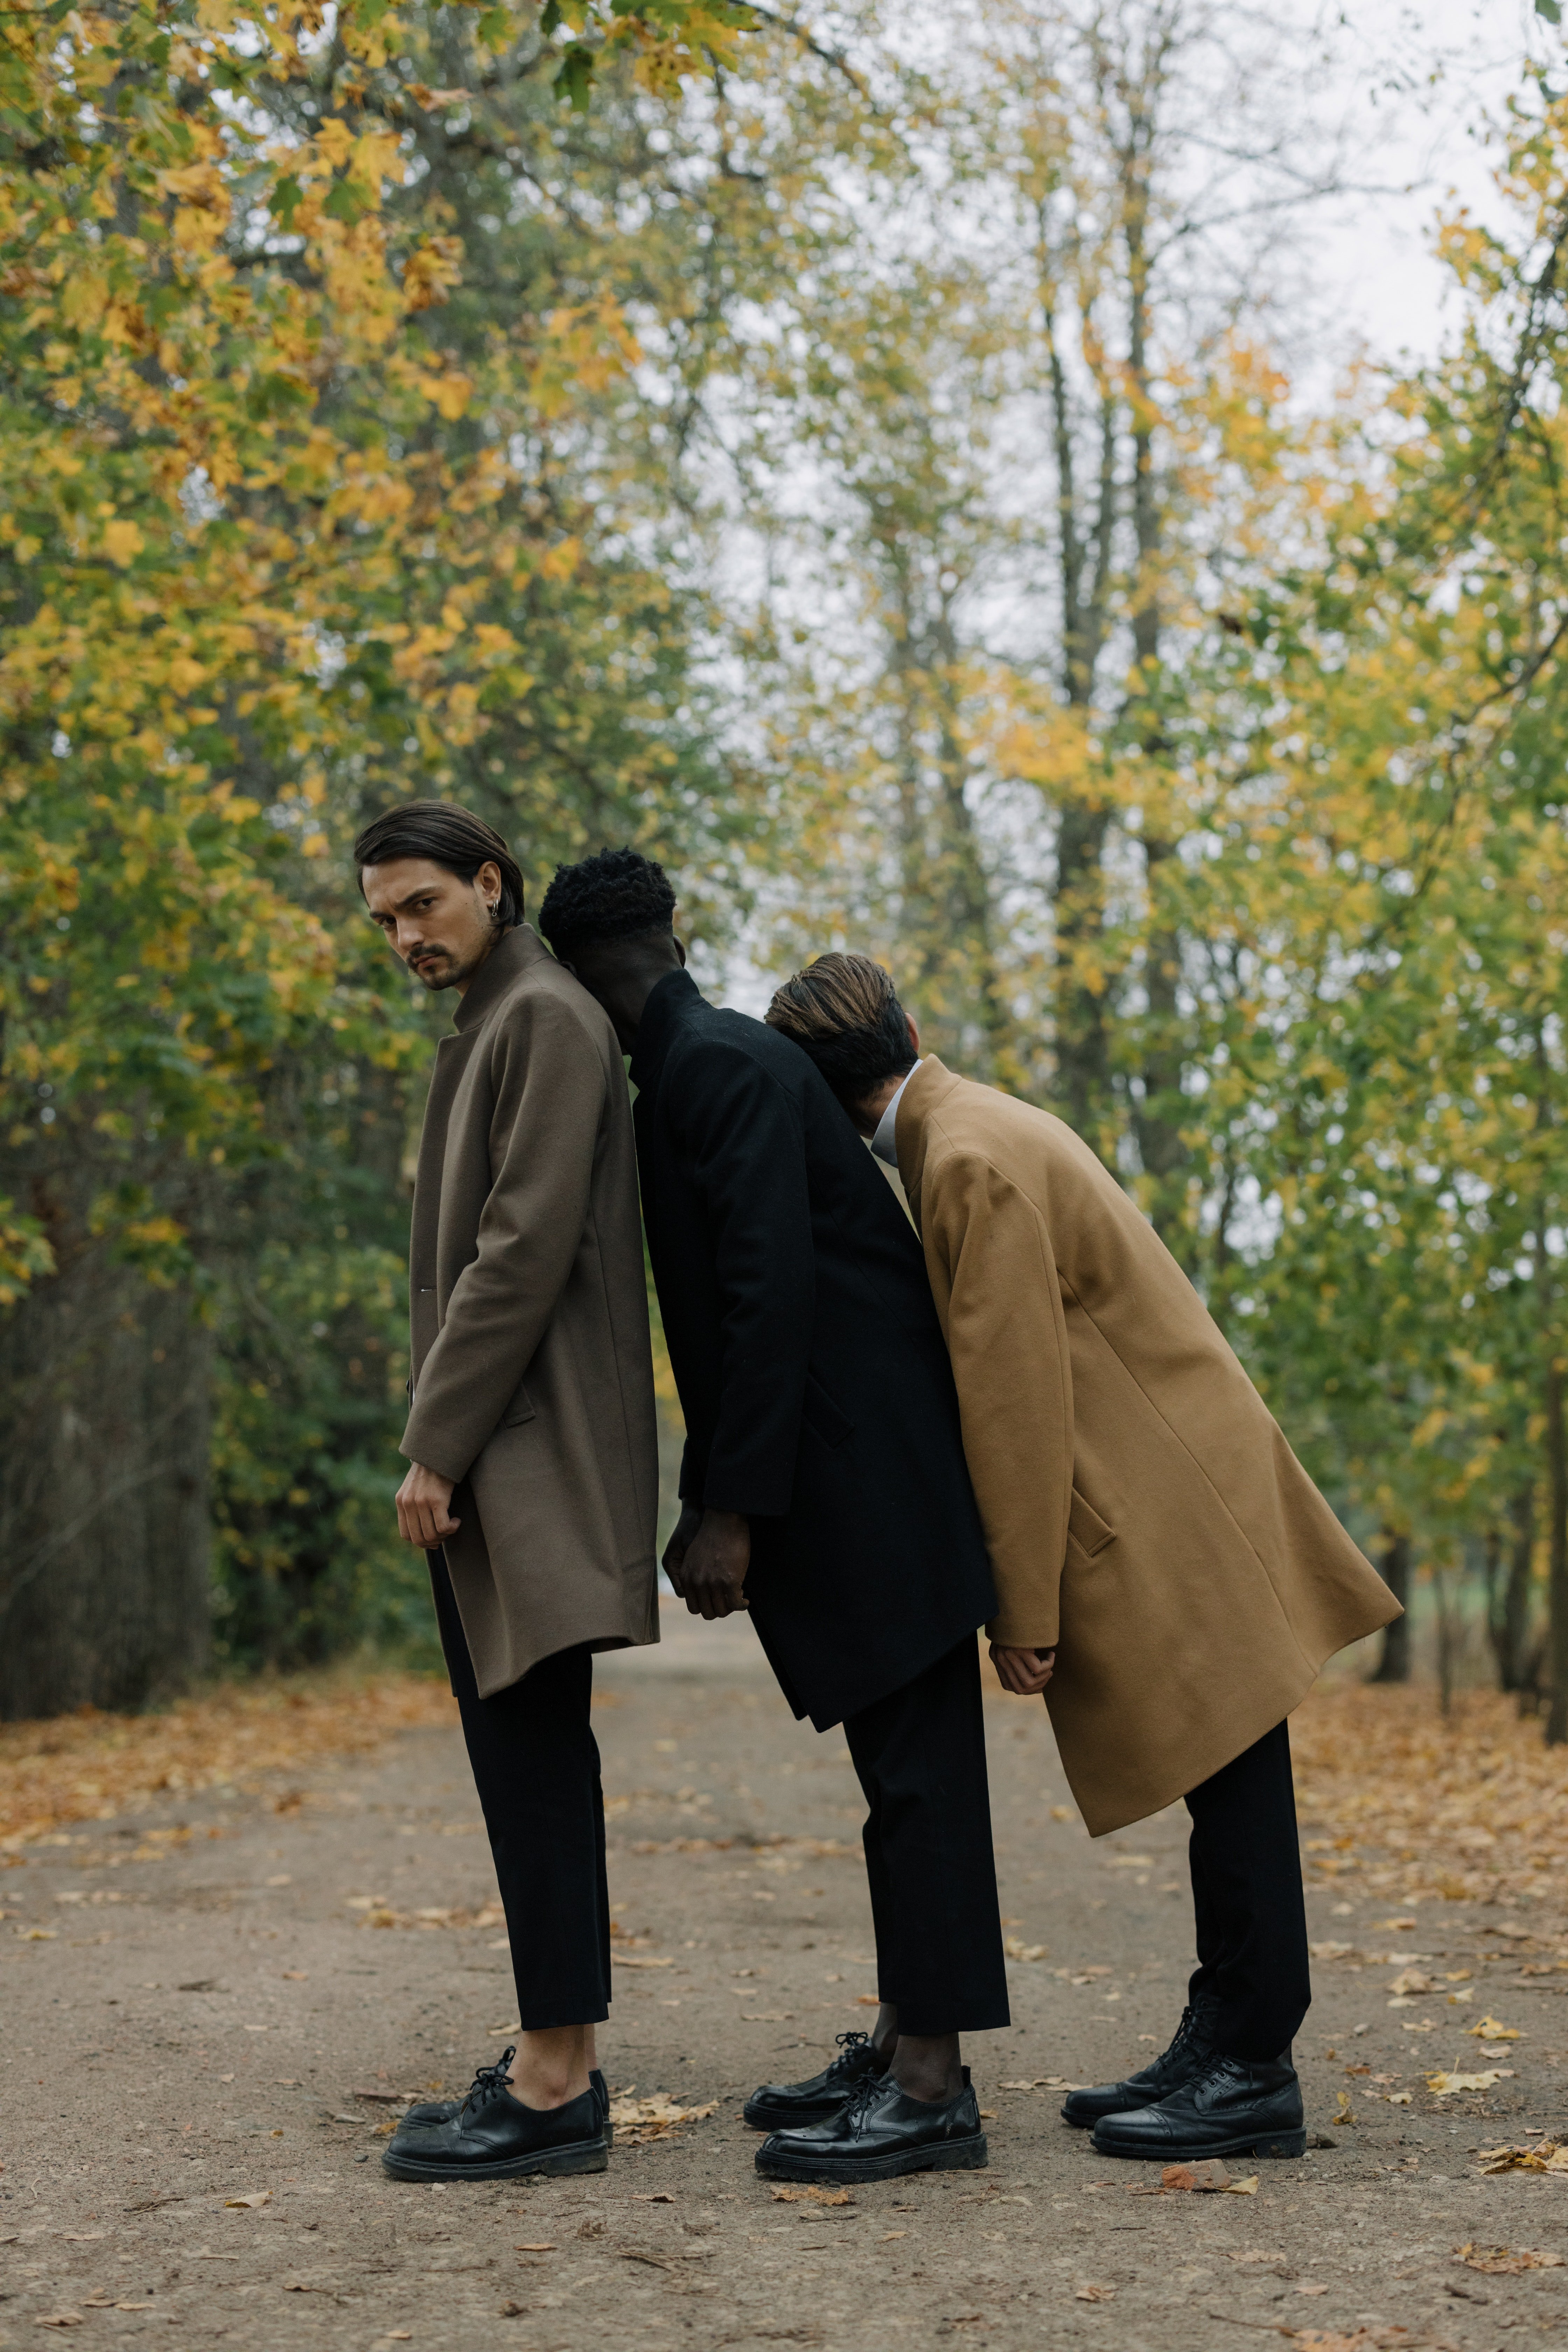 Pictured - The males standing near trees | Source: Pexels 